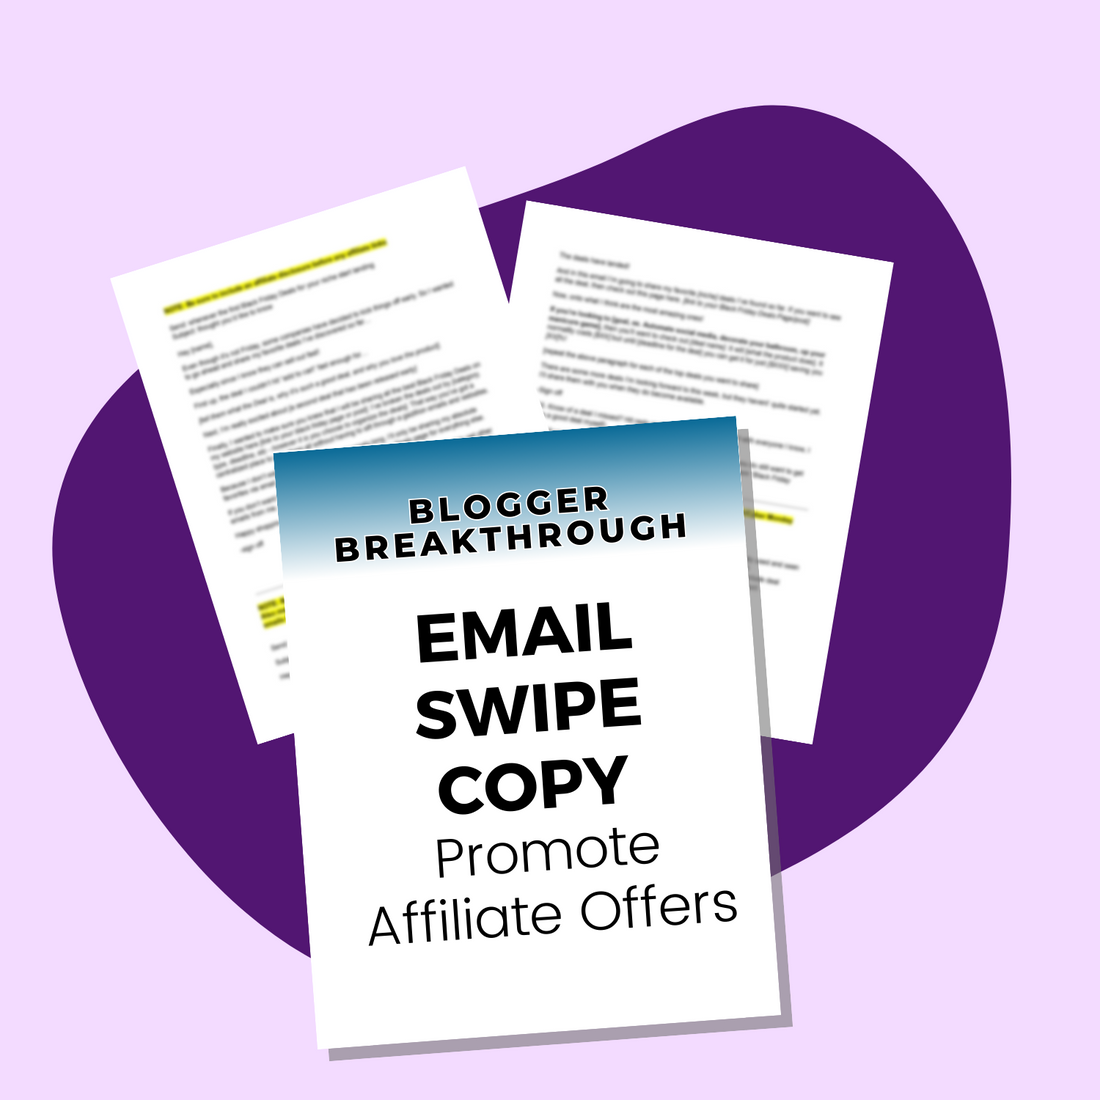 Email swipe copy promote Black Friday Affiliate Promotion Email Swipe Copy &amp; Data Review Worksheet and affiliate offers by Double Jacks Media.